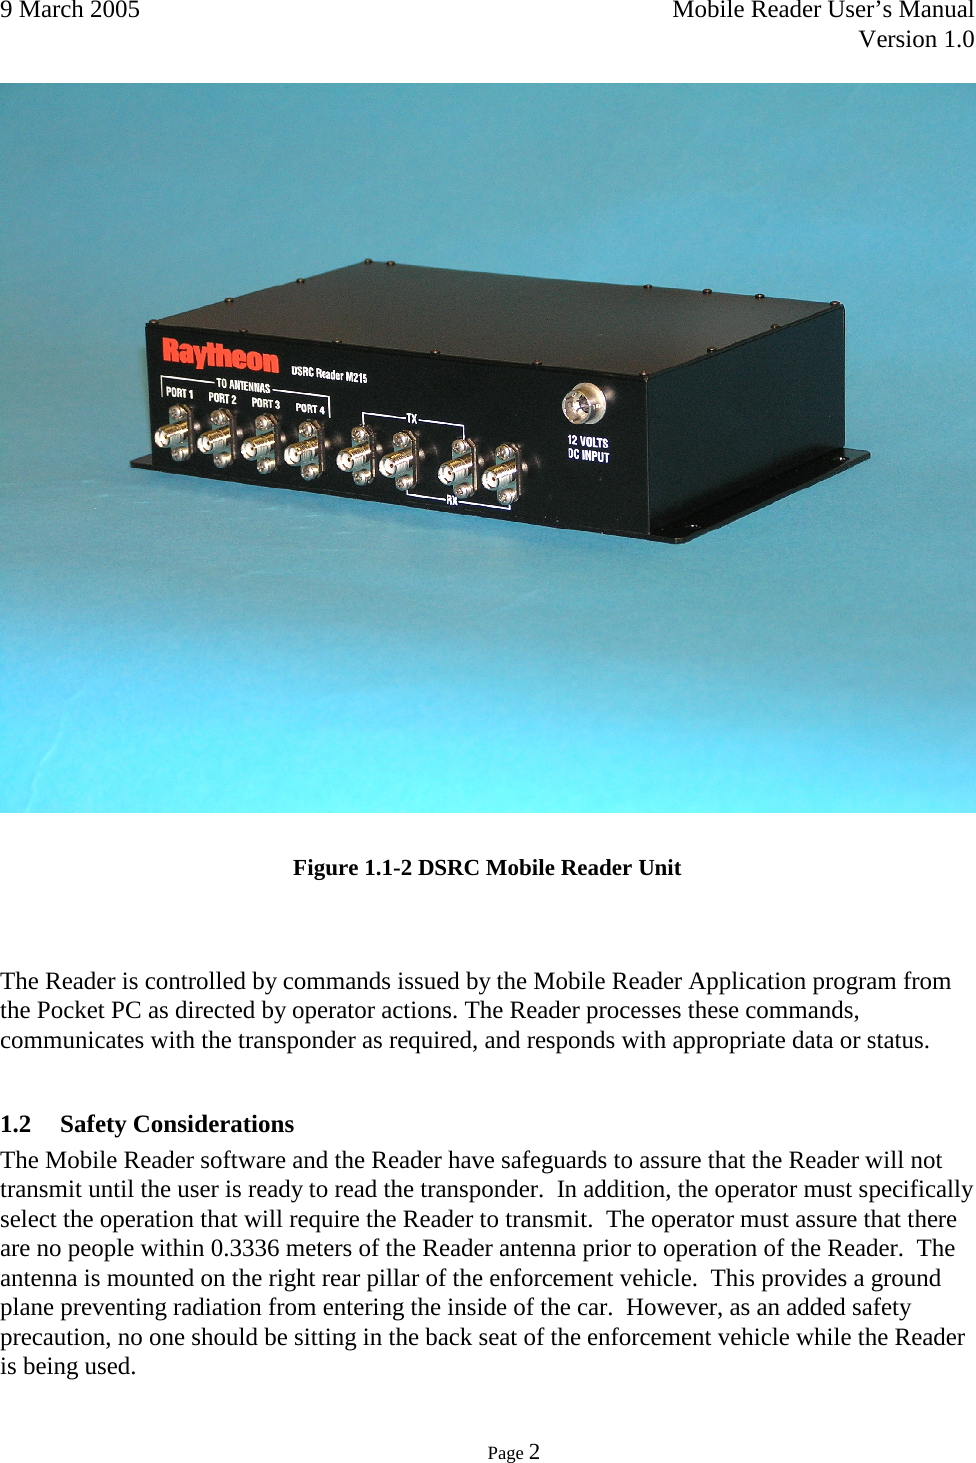 9 March 2005    Mobile Reader User’s Manual   Version 1.0      Page 2    Figure 1.1-2 DSRC Mobile Reader Unit   The Reader is controlled by commands issued by the Mobile Reader Application program from the Pocket PC as directed by operator actions. The Reader processes these commands, communicates with the transponder as required, and responds with appropriate data or status.   1.2 Safety Considerations The Mobile Reader software and the Reader have safeguards to assure that the Reader will not transmit until the user is ready to read the transponder.  In addition, the operator must specifically select the operation that will require the Reader to transmit.  The operator must assure that there are no people within 0.3336 meters of the Reader antenna prior to operation of the Reader.  The antenna is mounted on the right rear pillar of the enforcement vehicle.  This provides a ground plane preventing radiation from entering the inside of the car.  However, as an added safety precaution, no one should be sitting in the back seat of the enforcement vehicle while the Reader is being used. 